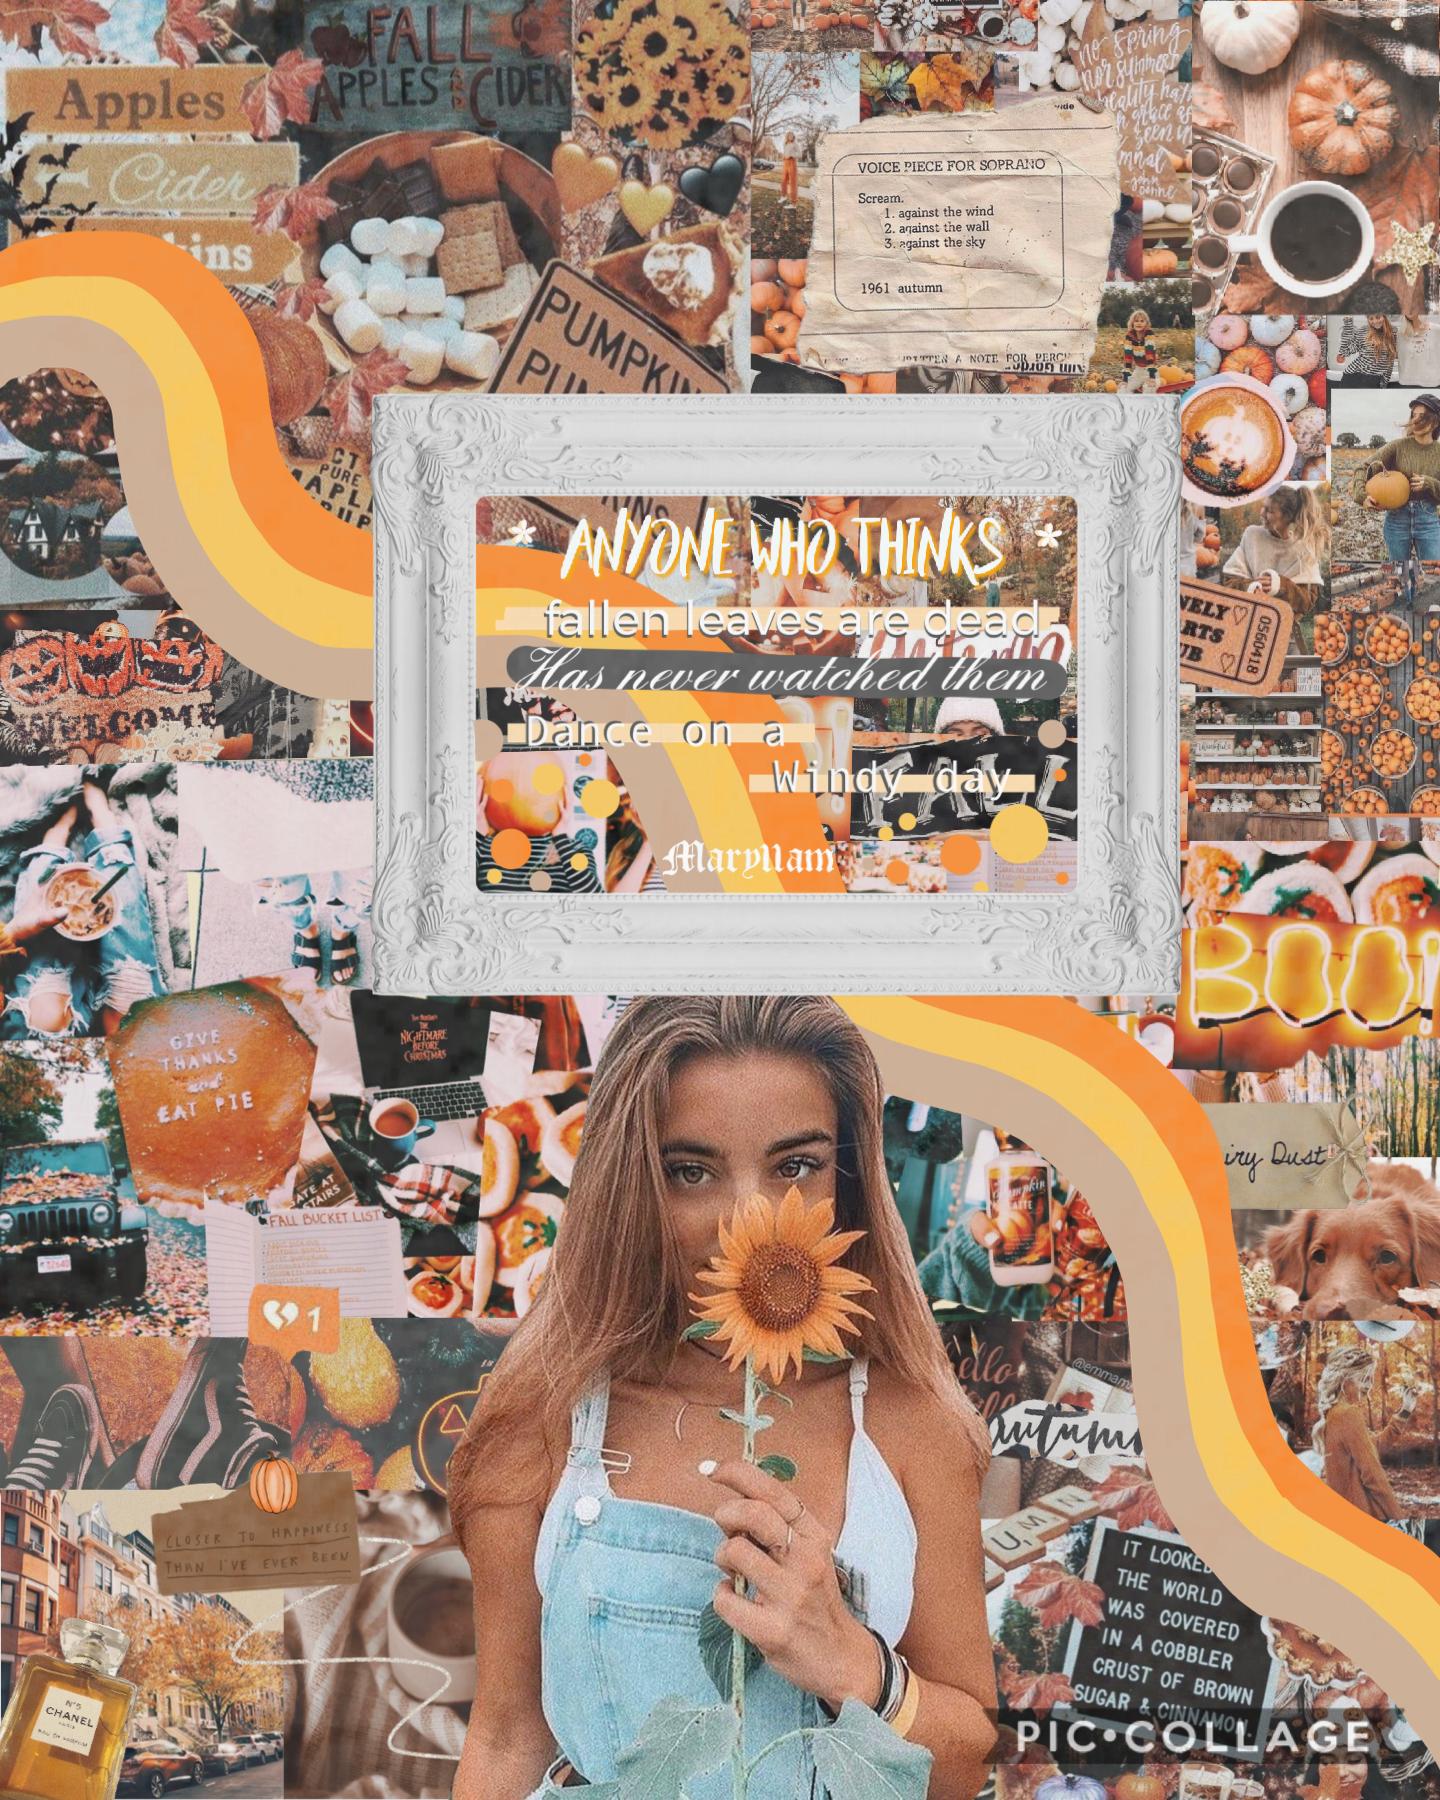 🧡 My entry for the -ForeverBliss- contest! 🧡